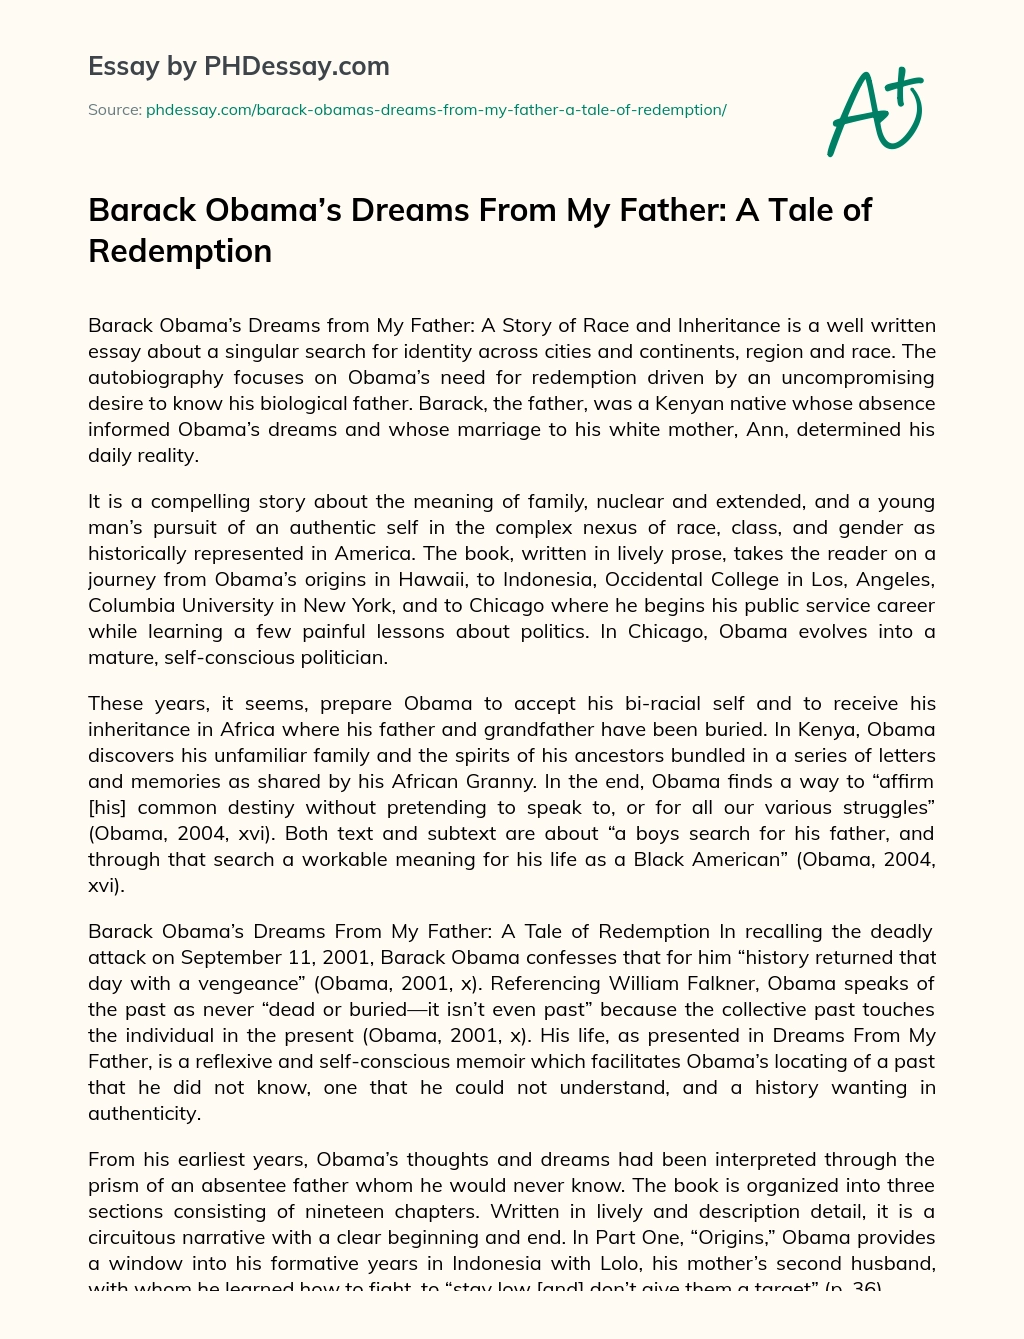 Barack Obama’s Dreams From My Father: A Tale of Redemption essay